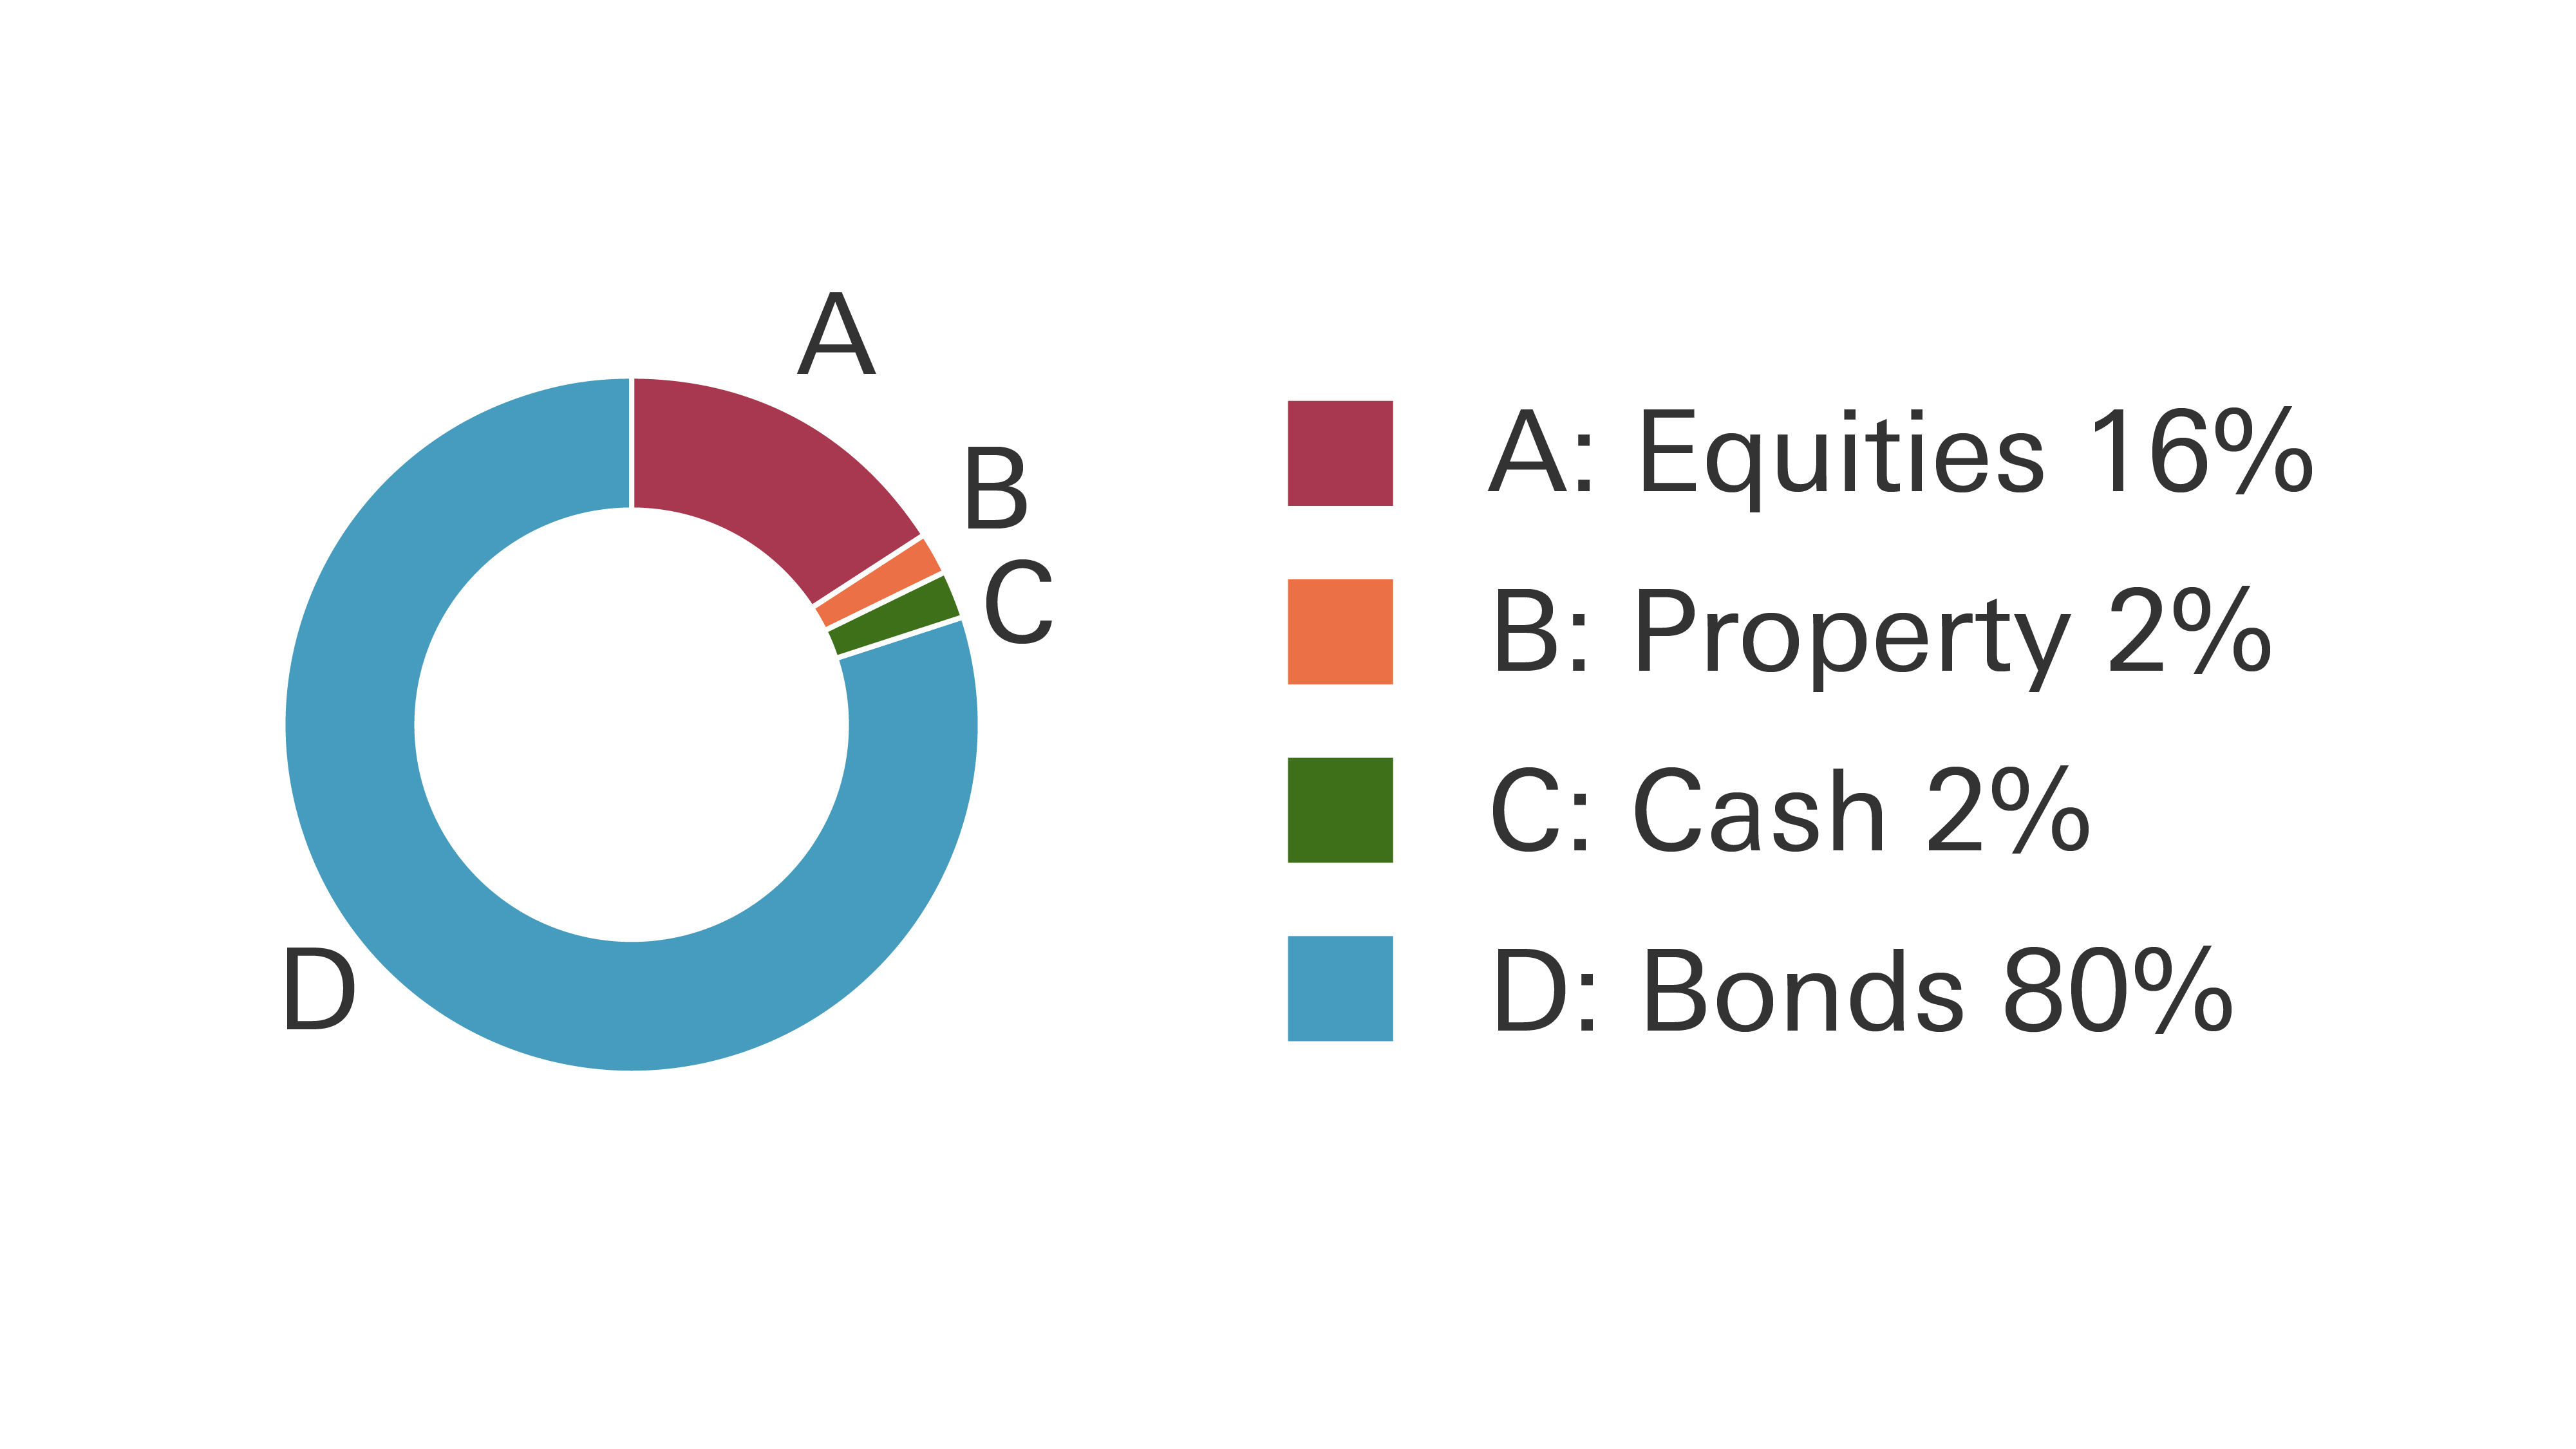 Cautious portfolio pie chart, showing Equities at 16%, Property 2%, Cash 2% and Bonds 80%.